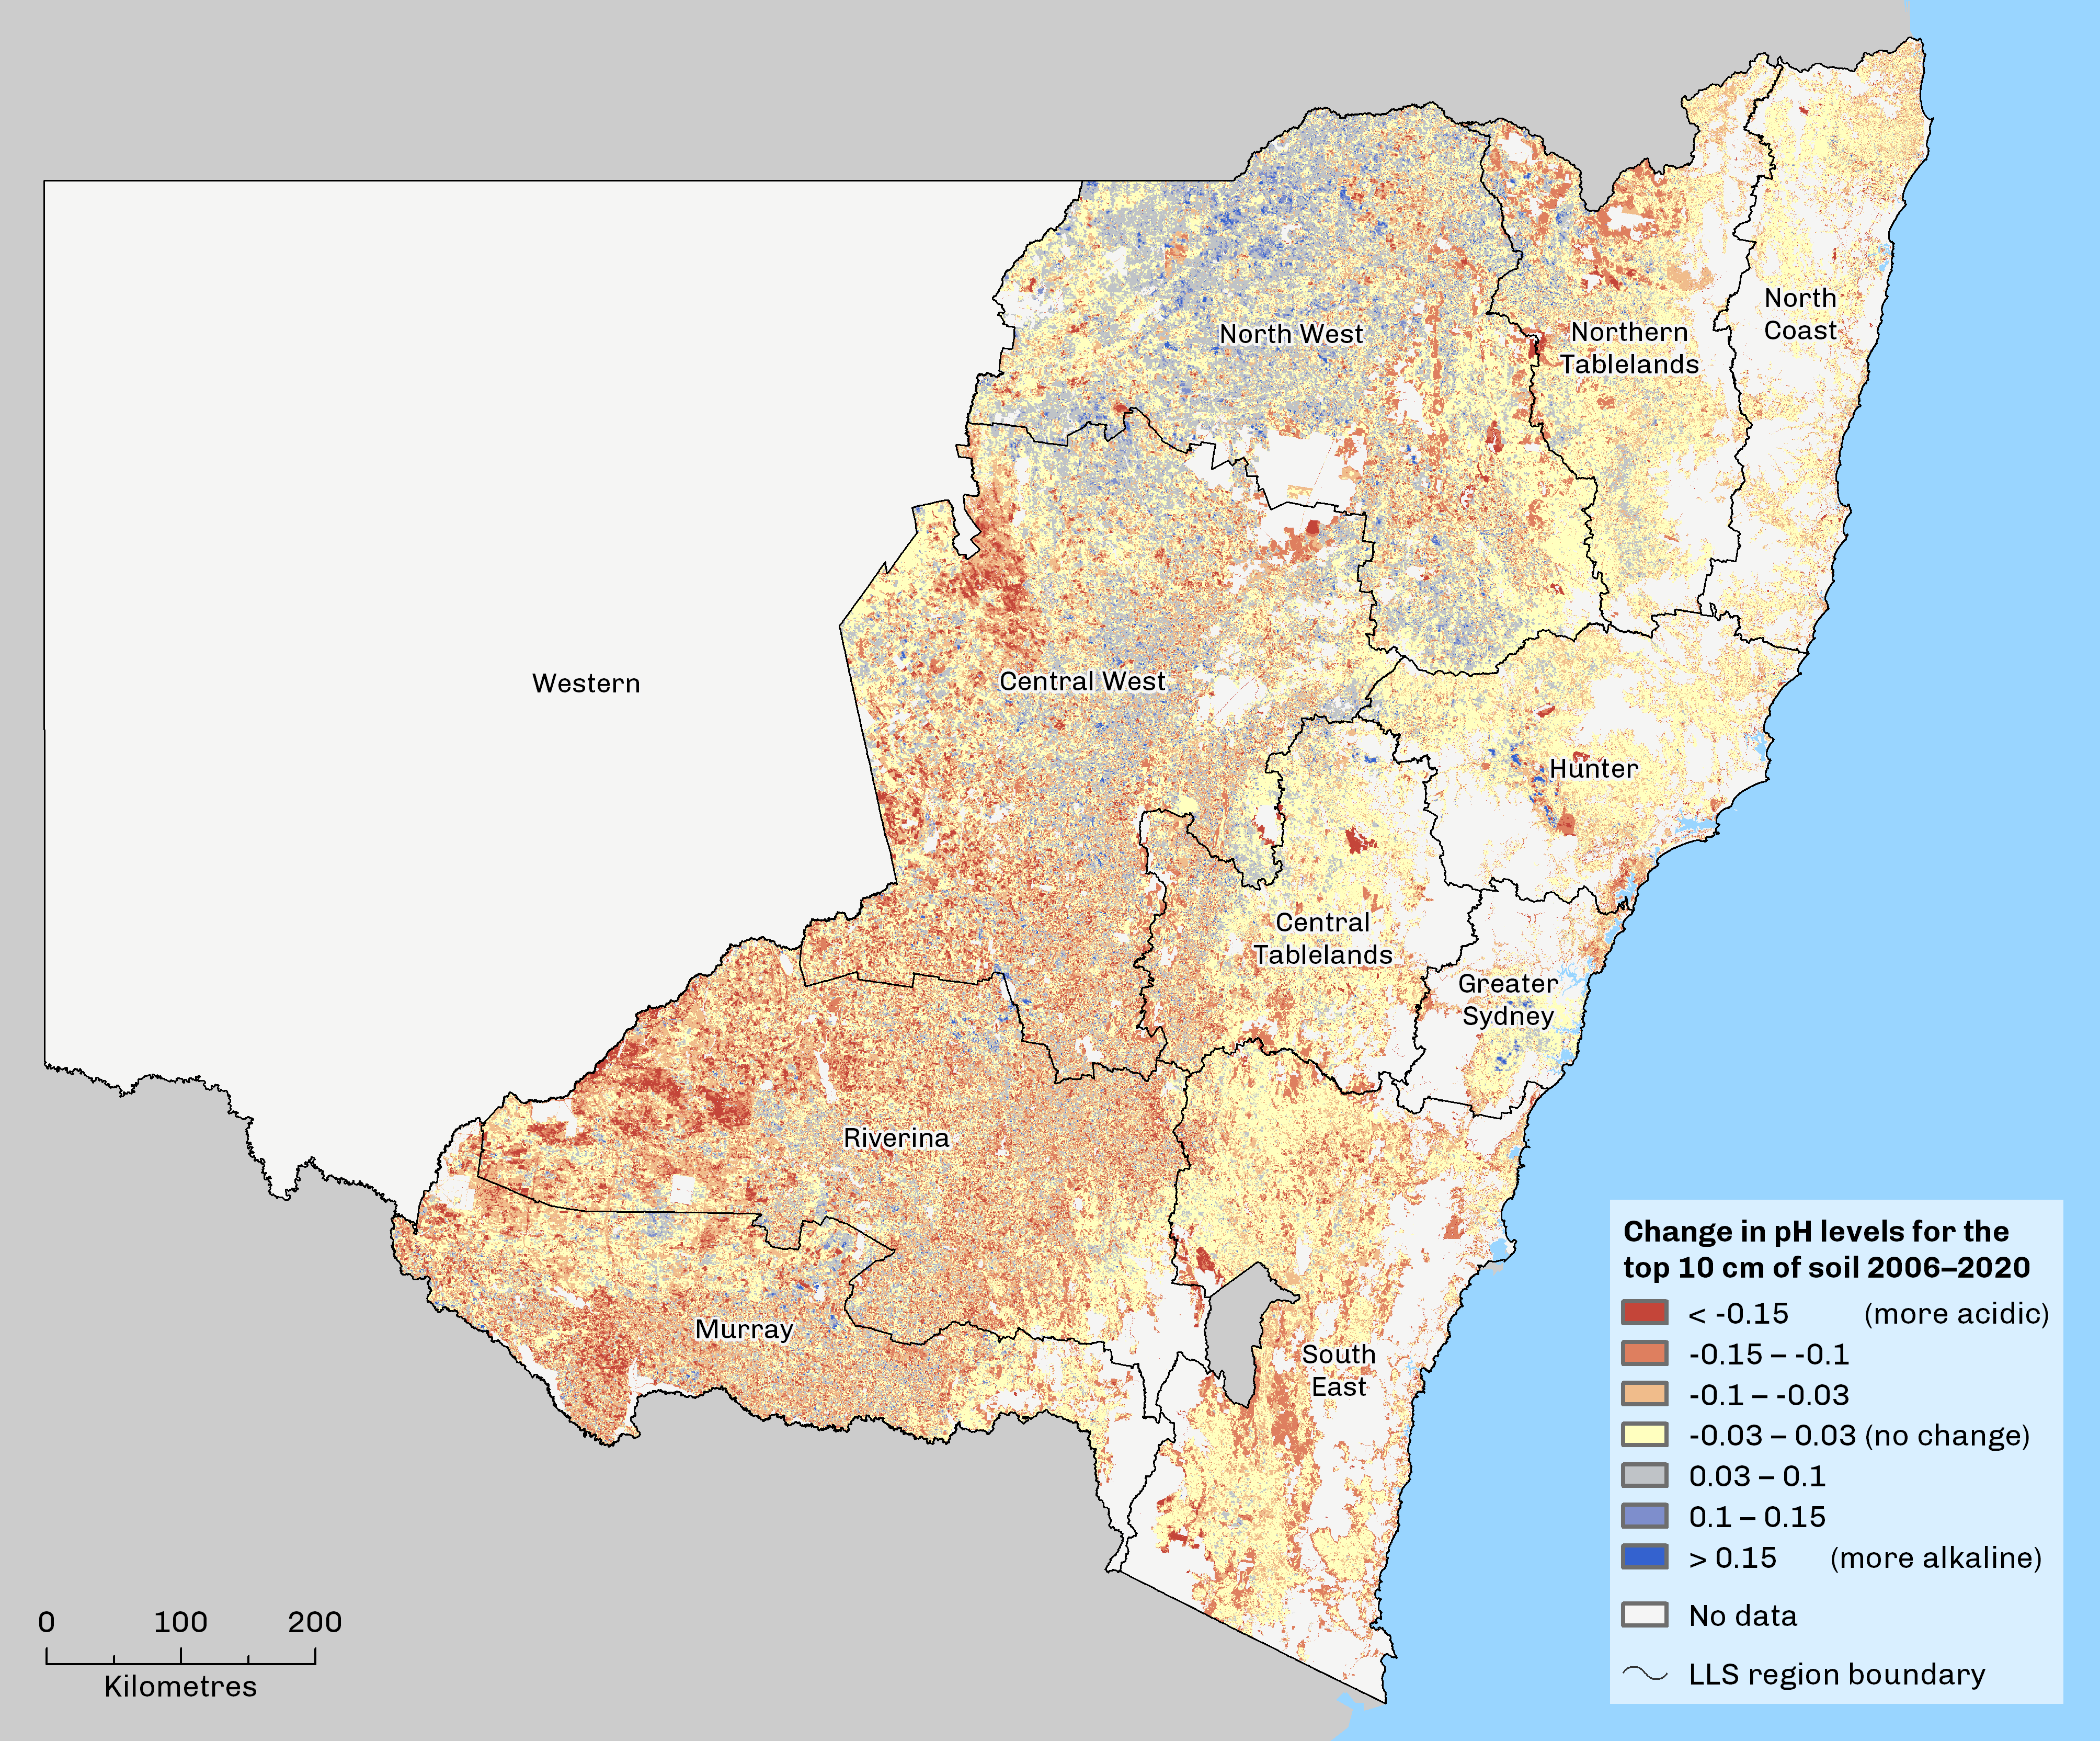 map showing change in soil ph between 2006 and 2020